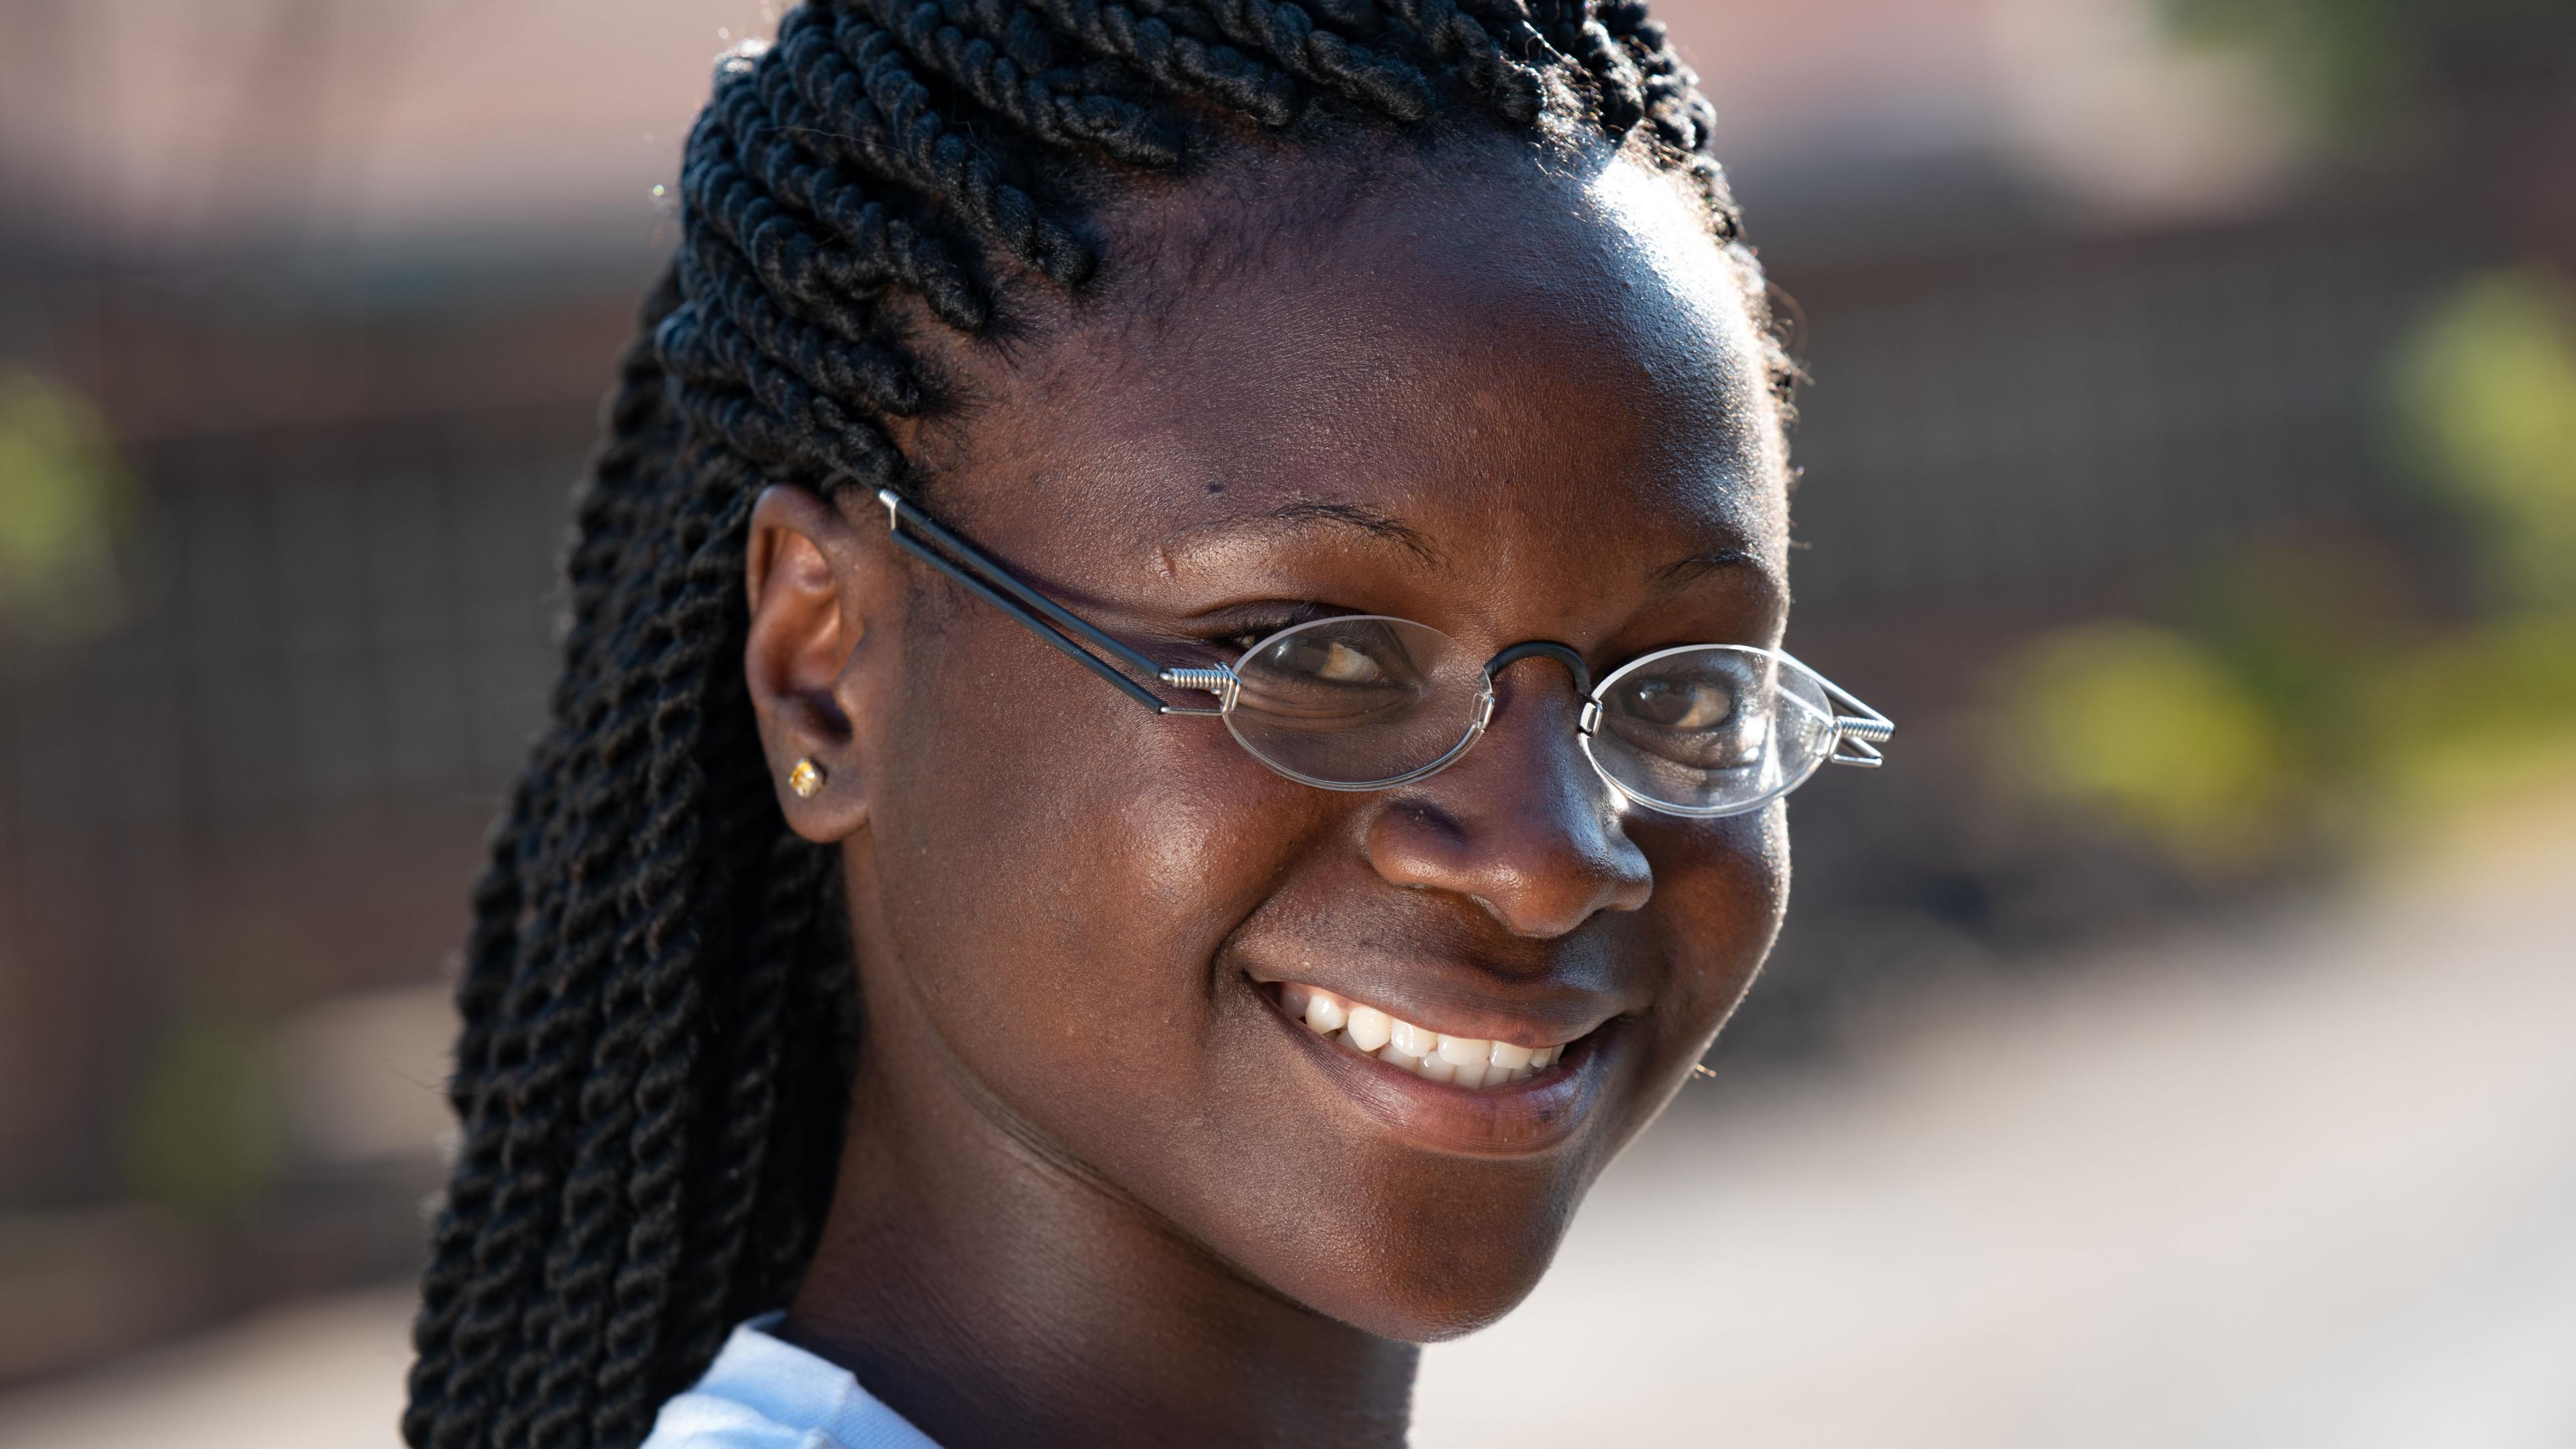 Malawian girl with OneDollarGlasses with double temples